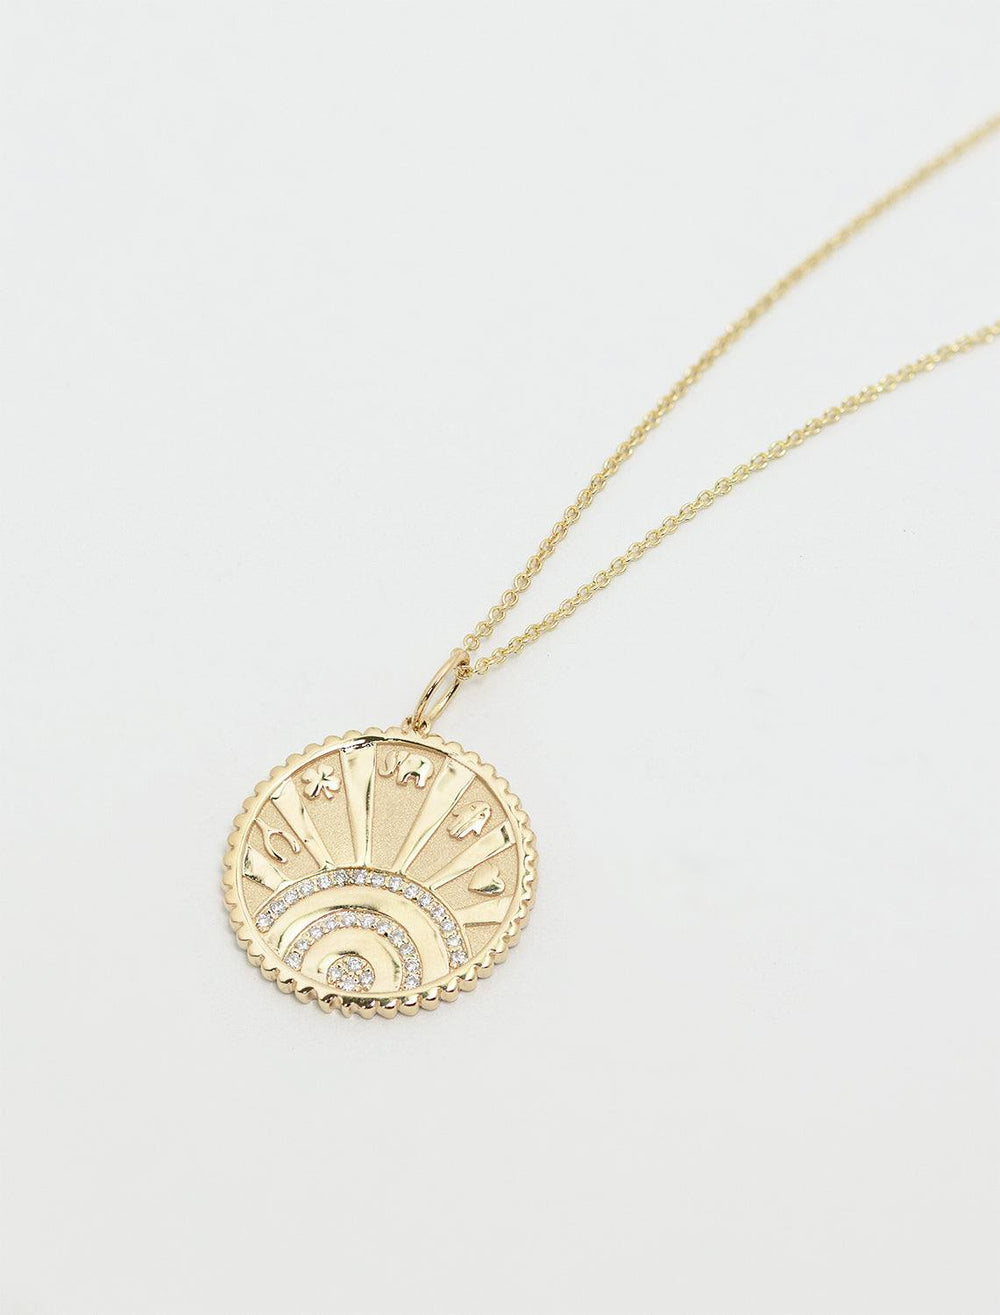 showing detailed shot of small pave luck coin necklace on fine 14k chain